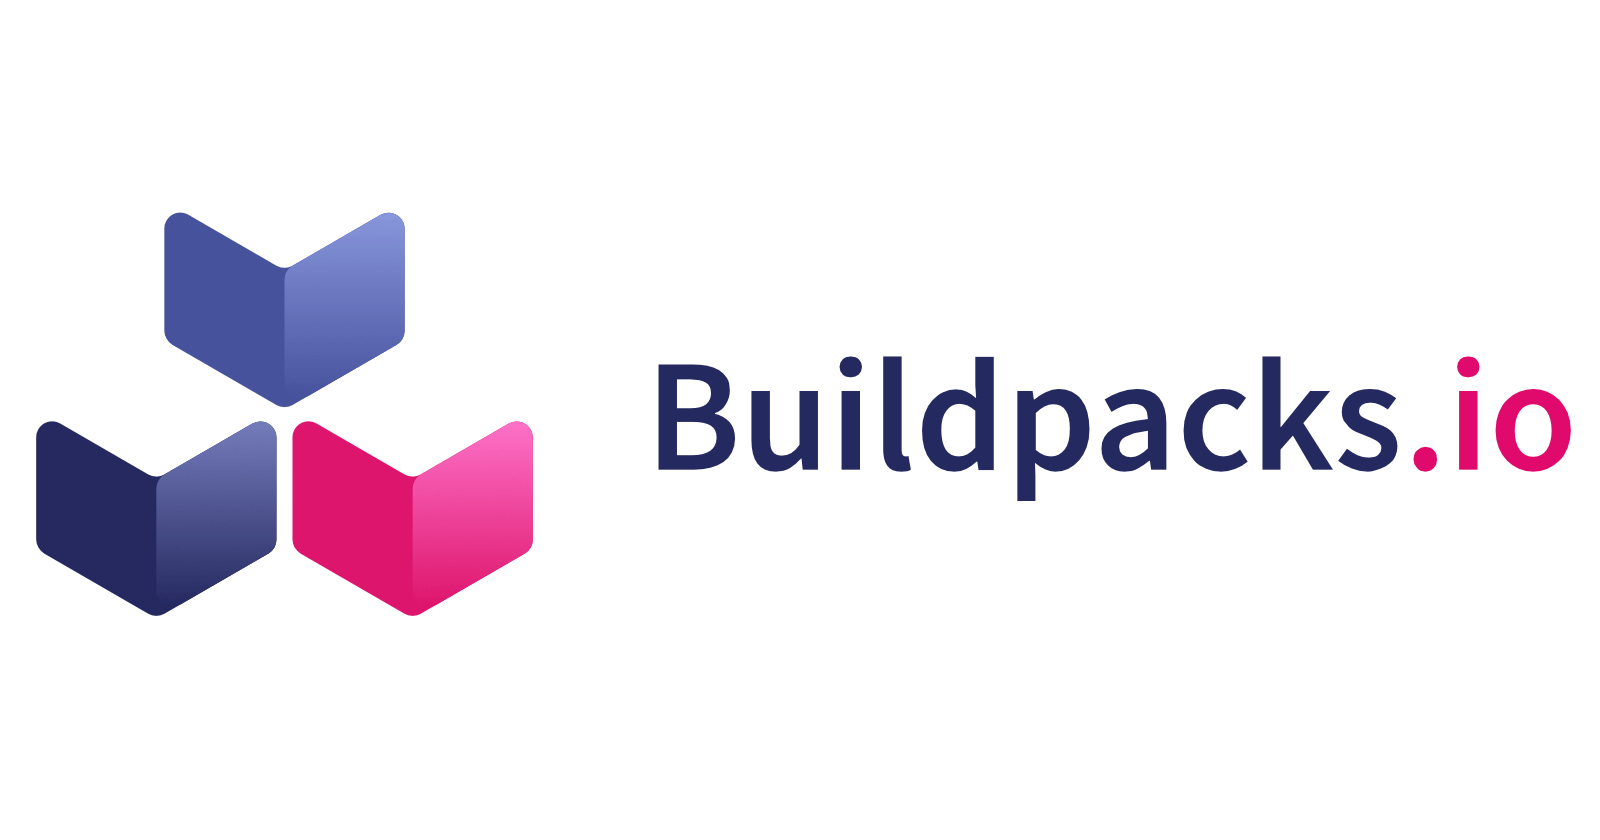 Real-world Cloud Native Buildpacks Part 1